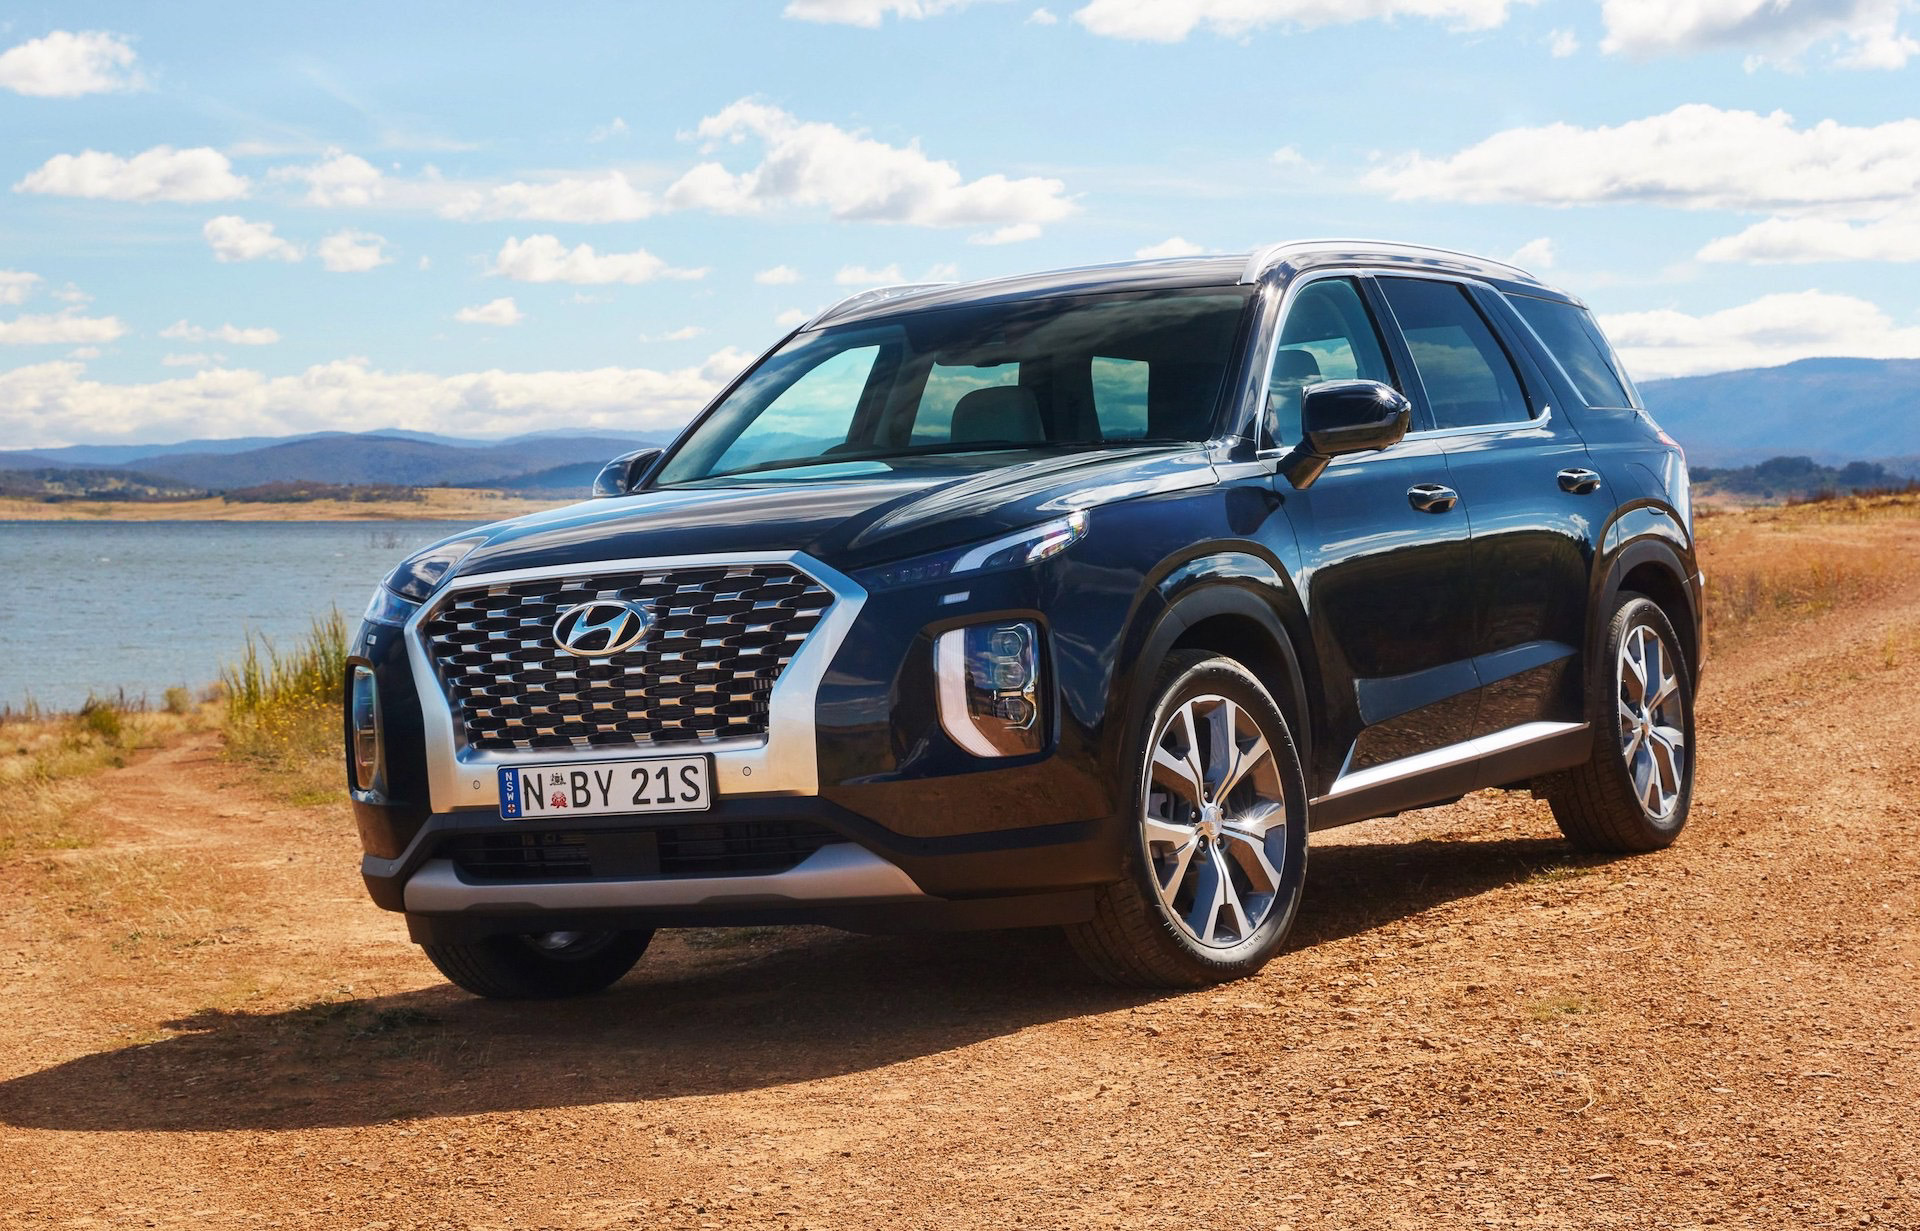 2021 Hyundai Palisade now on sale in Australia from $60,000